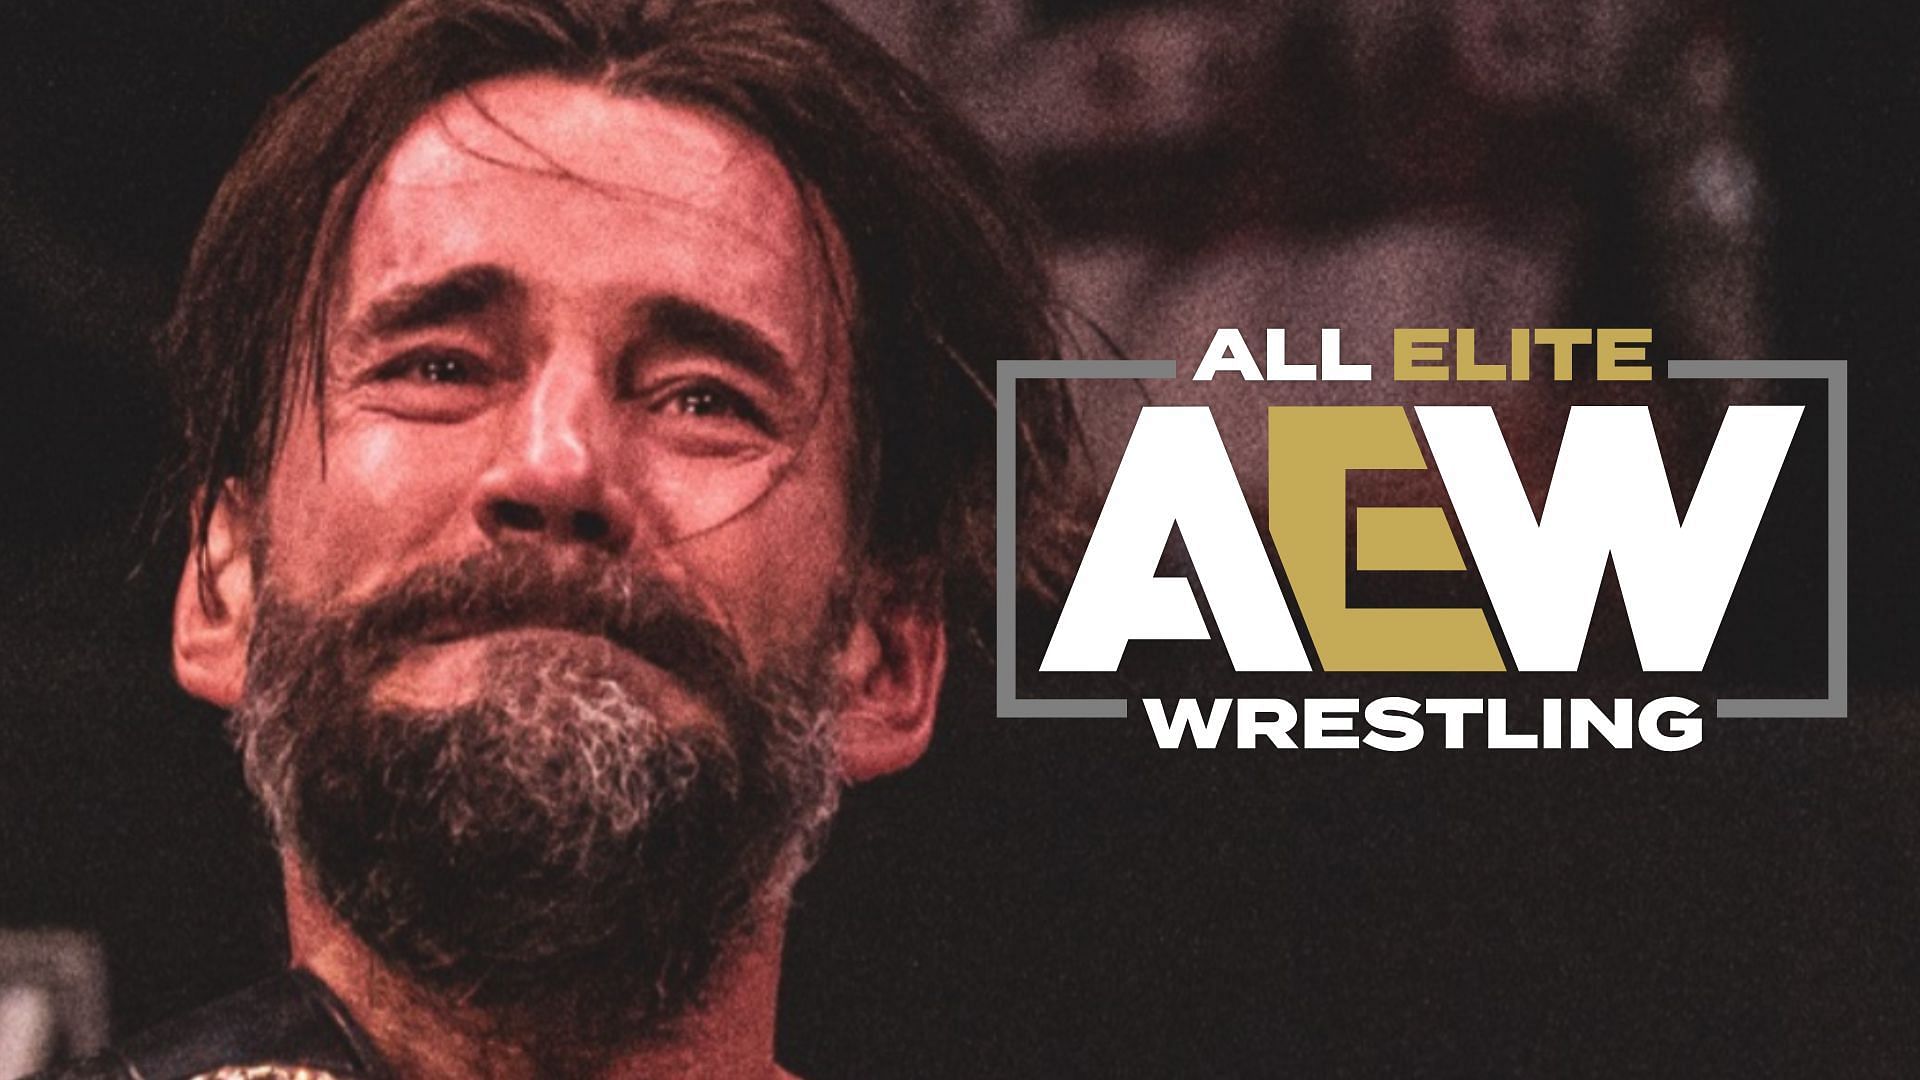 Why are people unhappy about CM Punk returning to AEW?